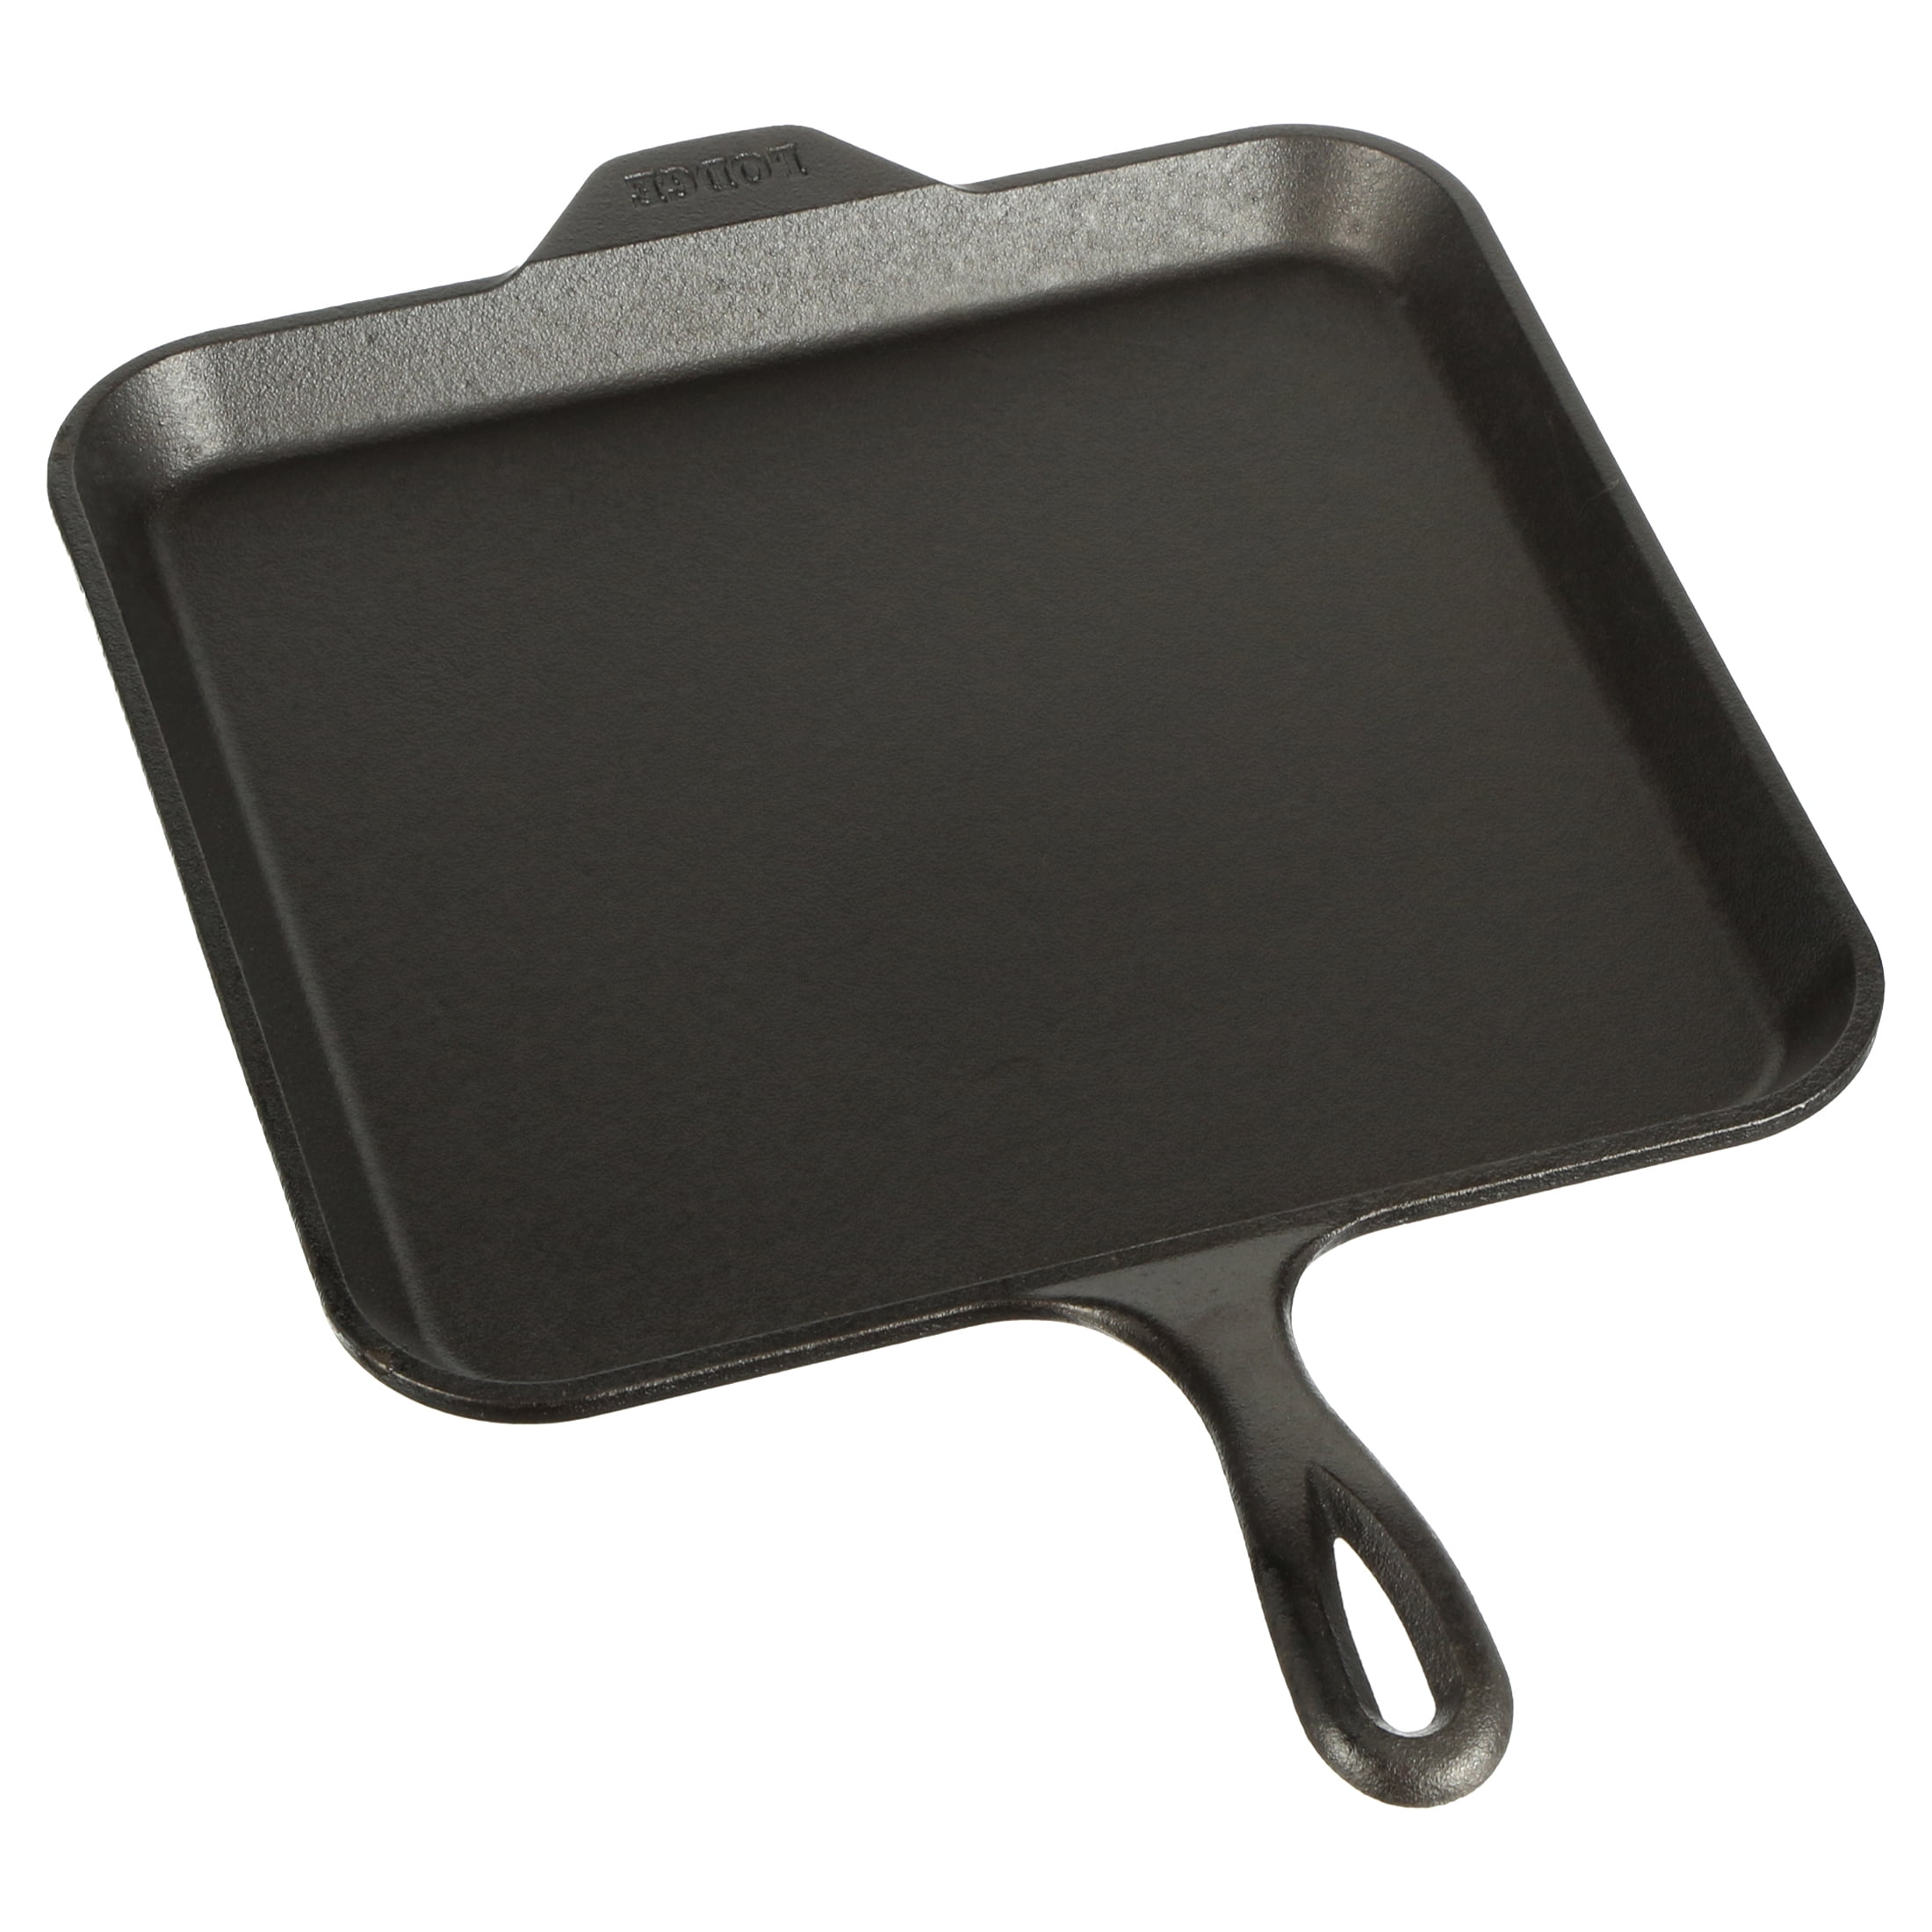 Vituzote.com - Lodge Cast Iron Square Grill Pan, 12-inch, Ribbed -  Pre-seasoned Shop online 📲 at  OR Visit any of our  shops @ 👇🏽 1. vituzote.com at Sarit Center - Lower